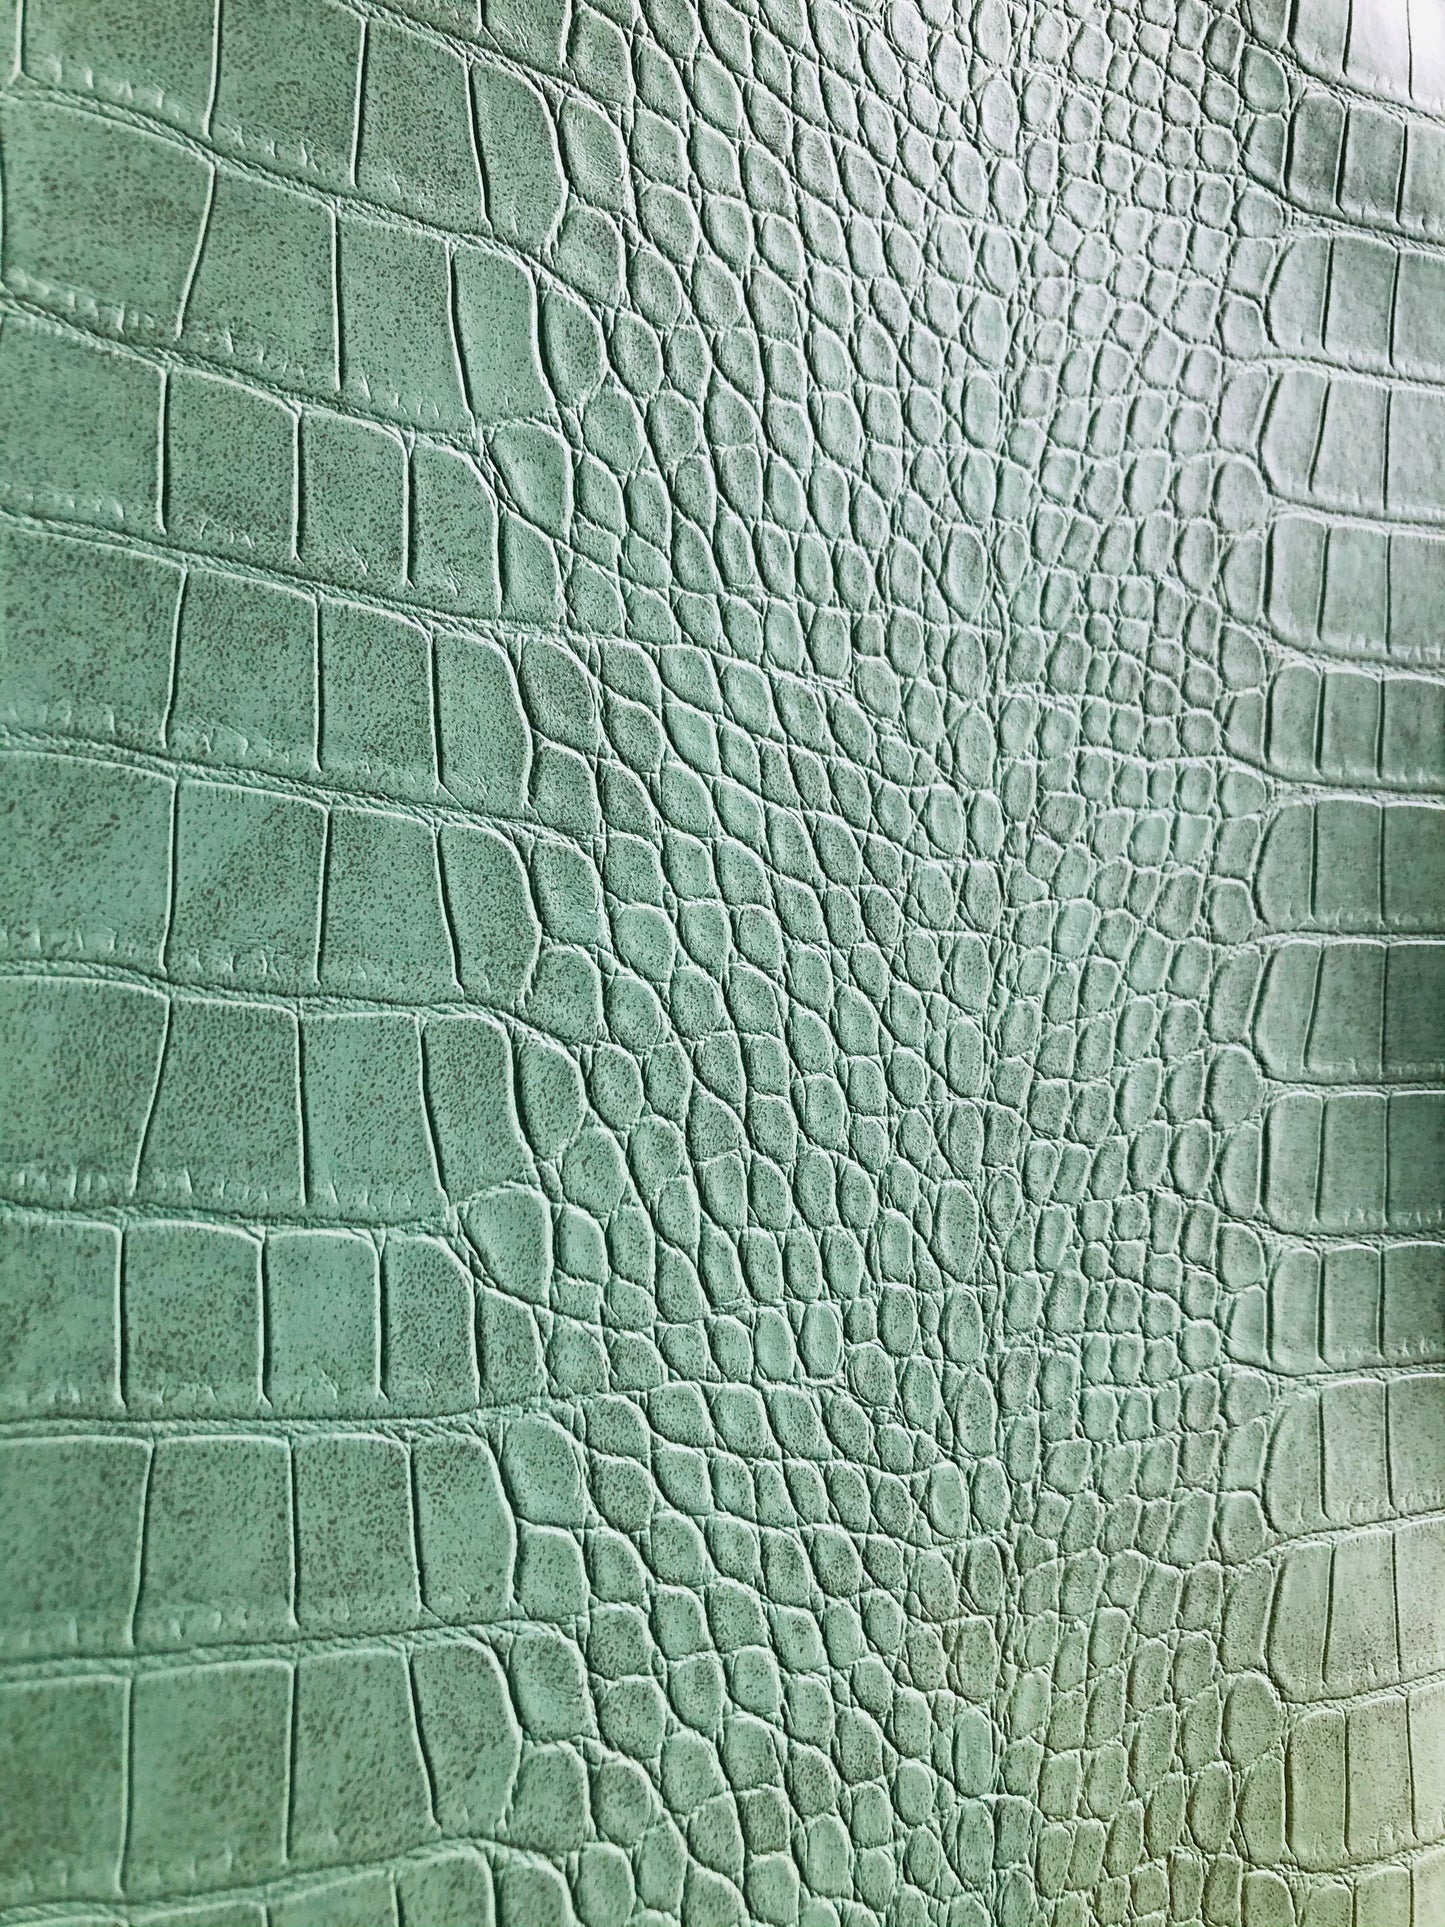 Croc pattern vinyl, Textured faux leather, Vegan Pleather, textured vinyl, artificial leather for bags, clothes, upholstery by the meter